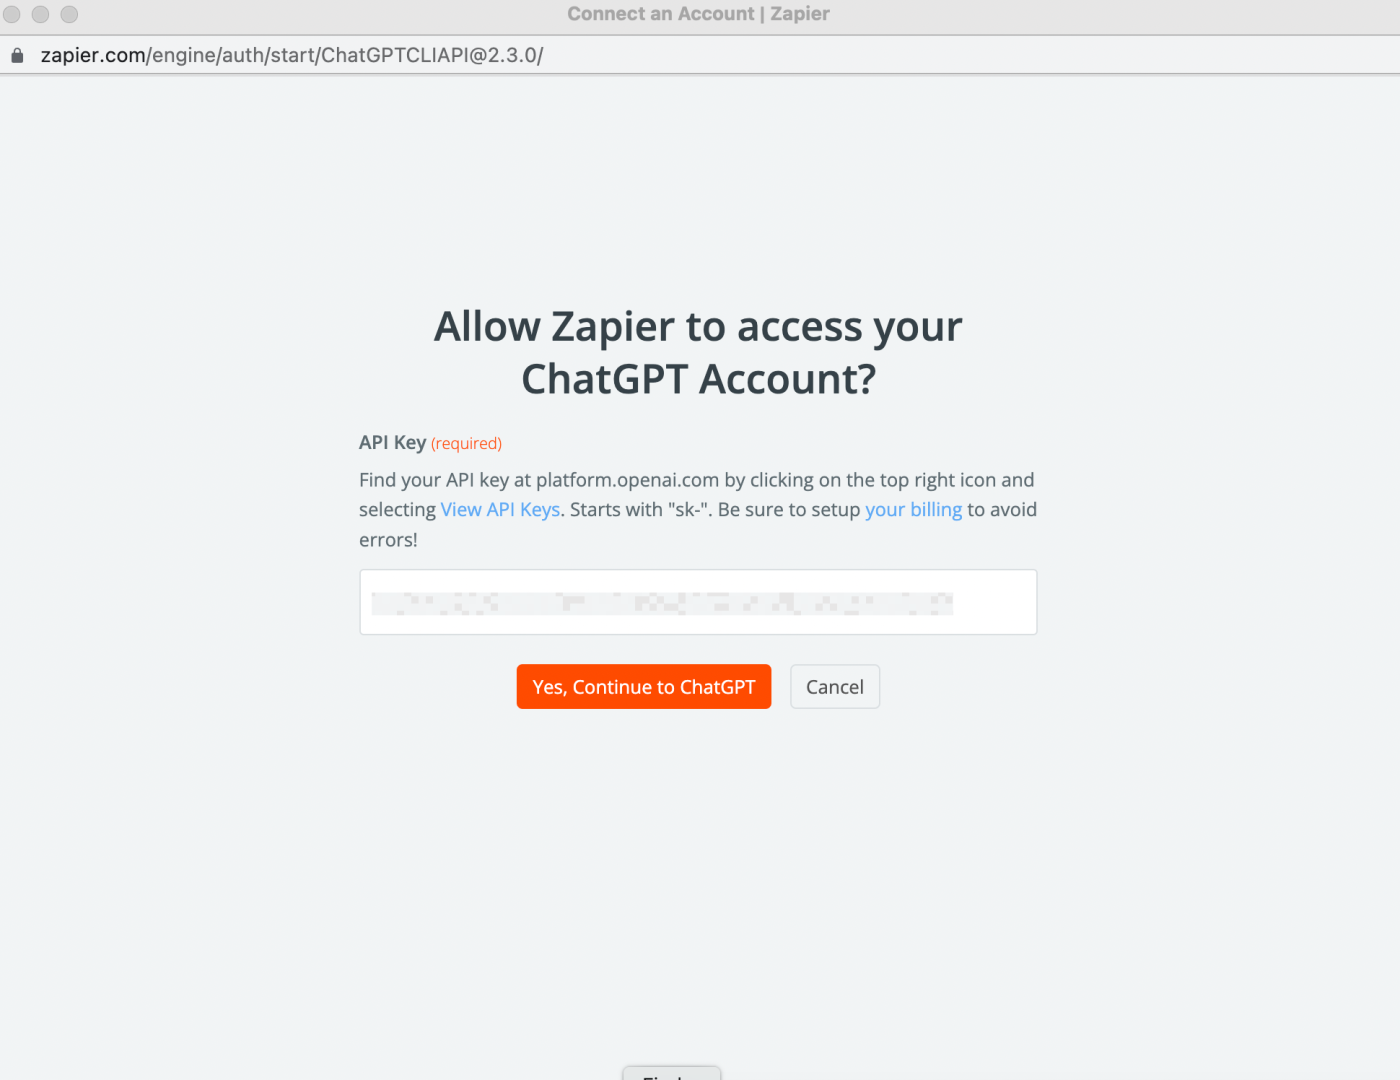 A screenshot of the login portal to connect a ChatGPT account to Zapier.